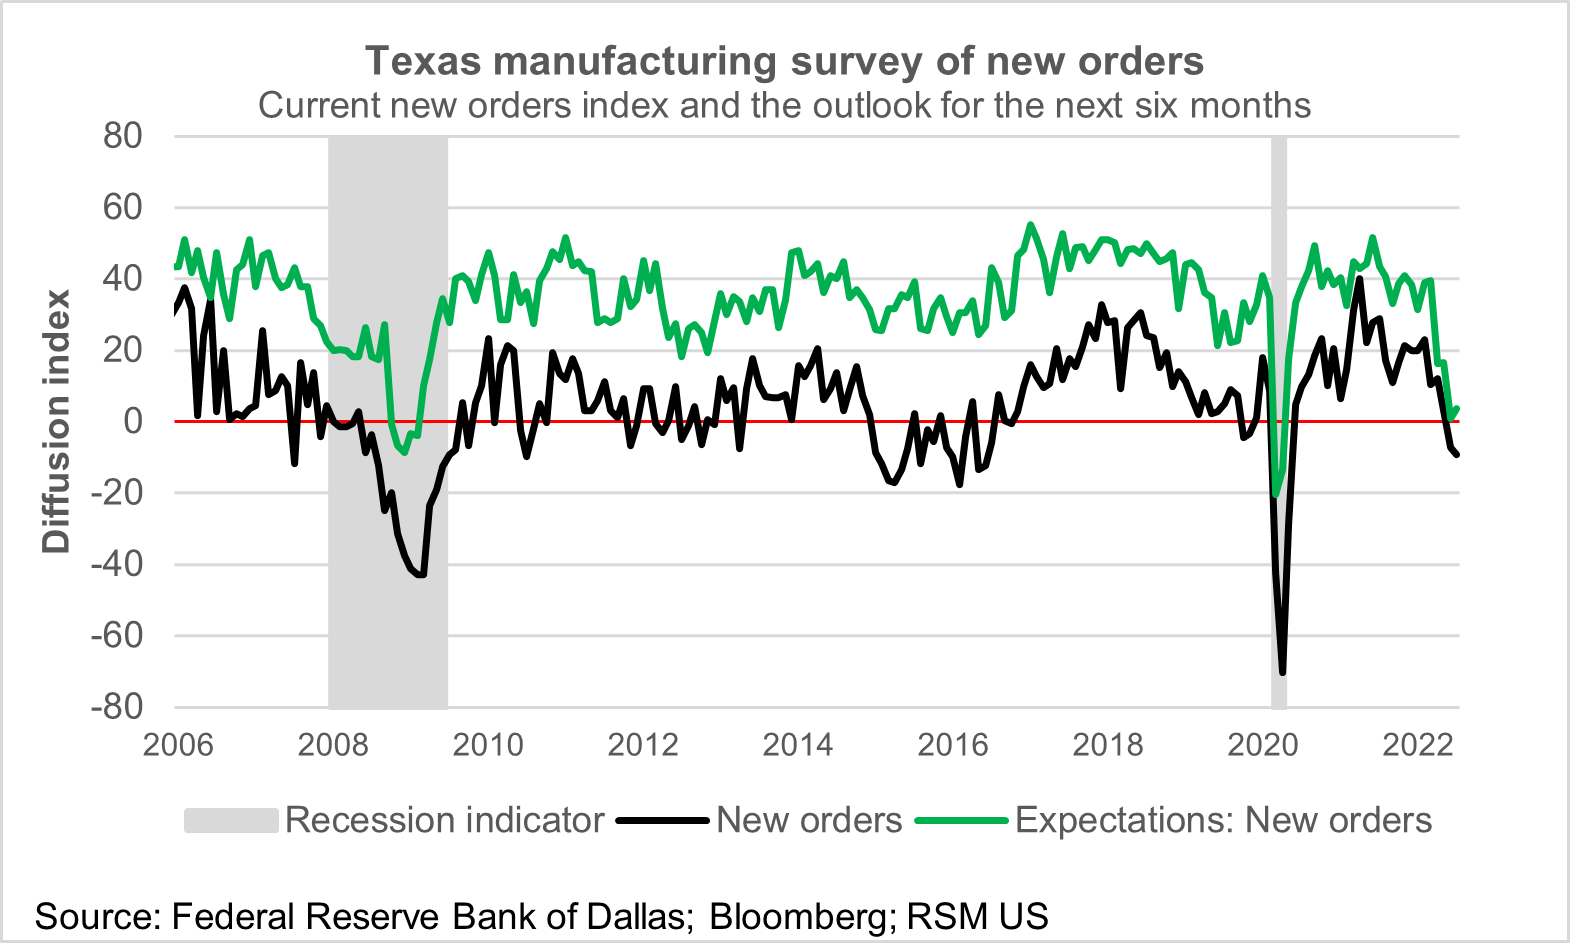 A chart shows the manufacturing index in Texas, for current new orders and expectations of new orders, from 2006 to mid-2022